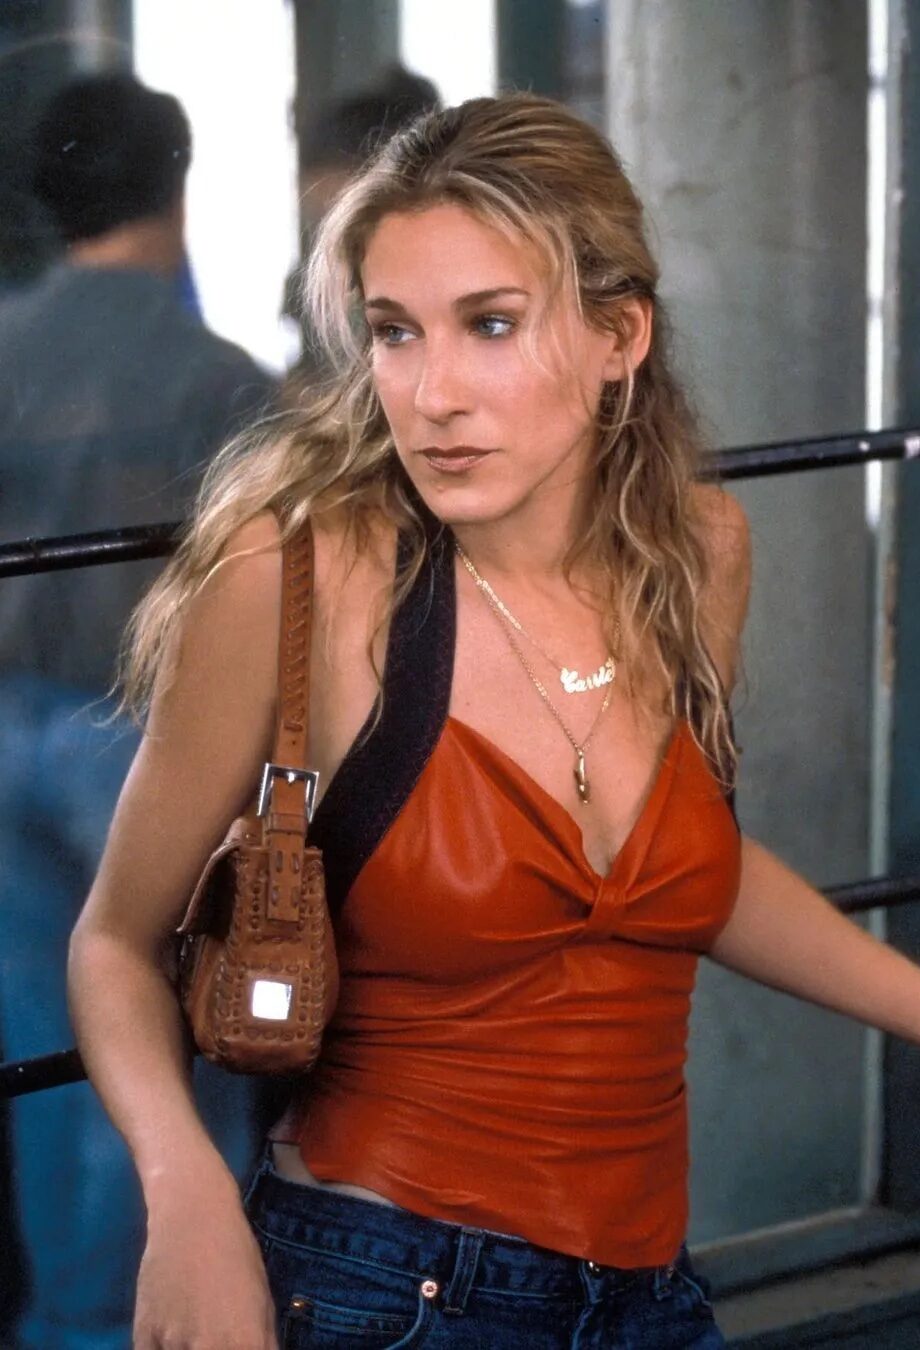 carrie-bradshaw-core-to-iconic-στιλ-της-carrie-αναβιώνει-26-χρόνια-μετ-313629